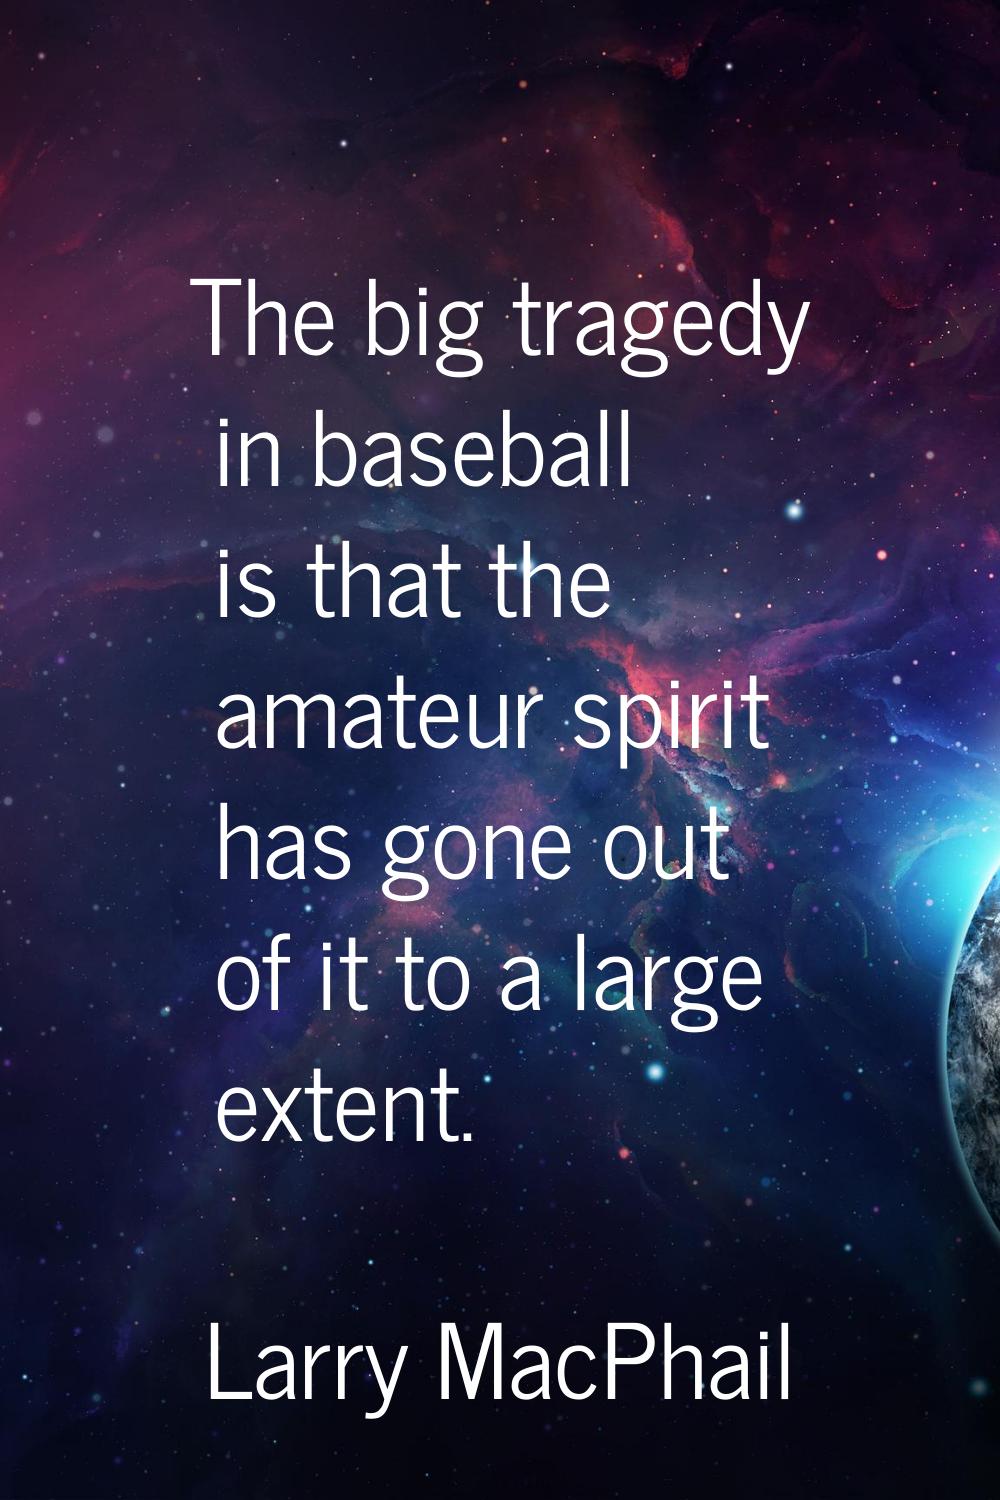 The big tragedy in baseball is that the amateur spirit has gone out of it to a large extent.